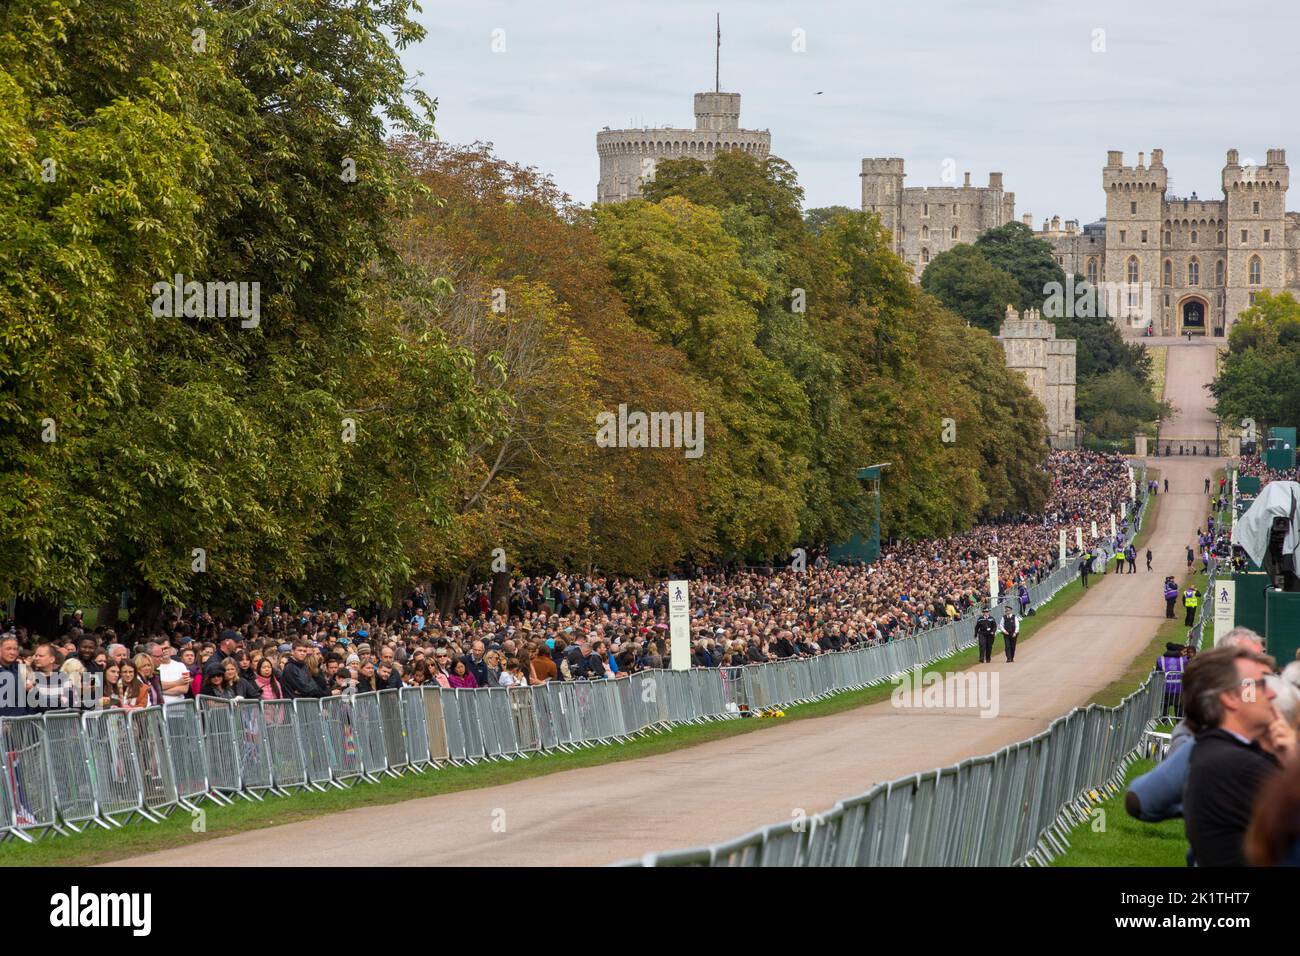 Windsor, UK. 19th September, 2022. Thousands of mourners line the Long Walk in Windsor Great Park to view the procession of Queen Elizabeth II's coffin in the State Hearse to St George’s Chapel for the Committal Service. Queen Elizabeth II, the UK's longest-serving monarch, died at Balmoral aged 96 on 8th September 2022 after a reign lasting 70 years. Credit: Mark Kerrison/Alamy Live News Stock Photo